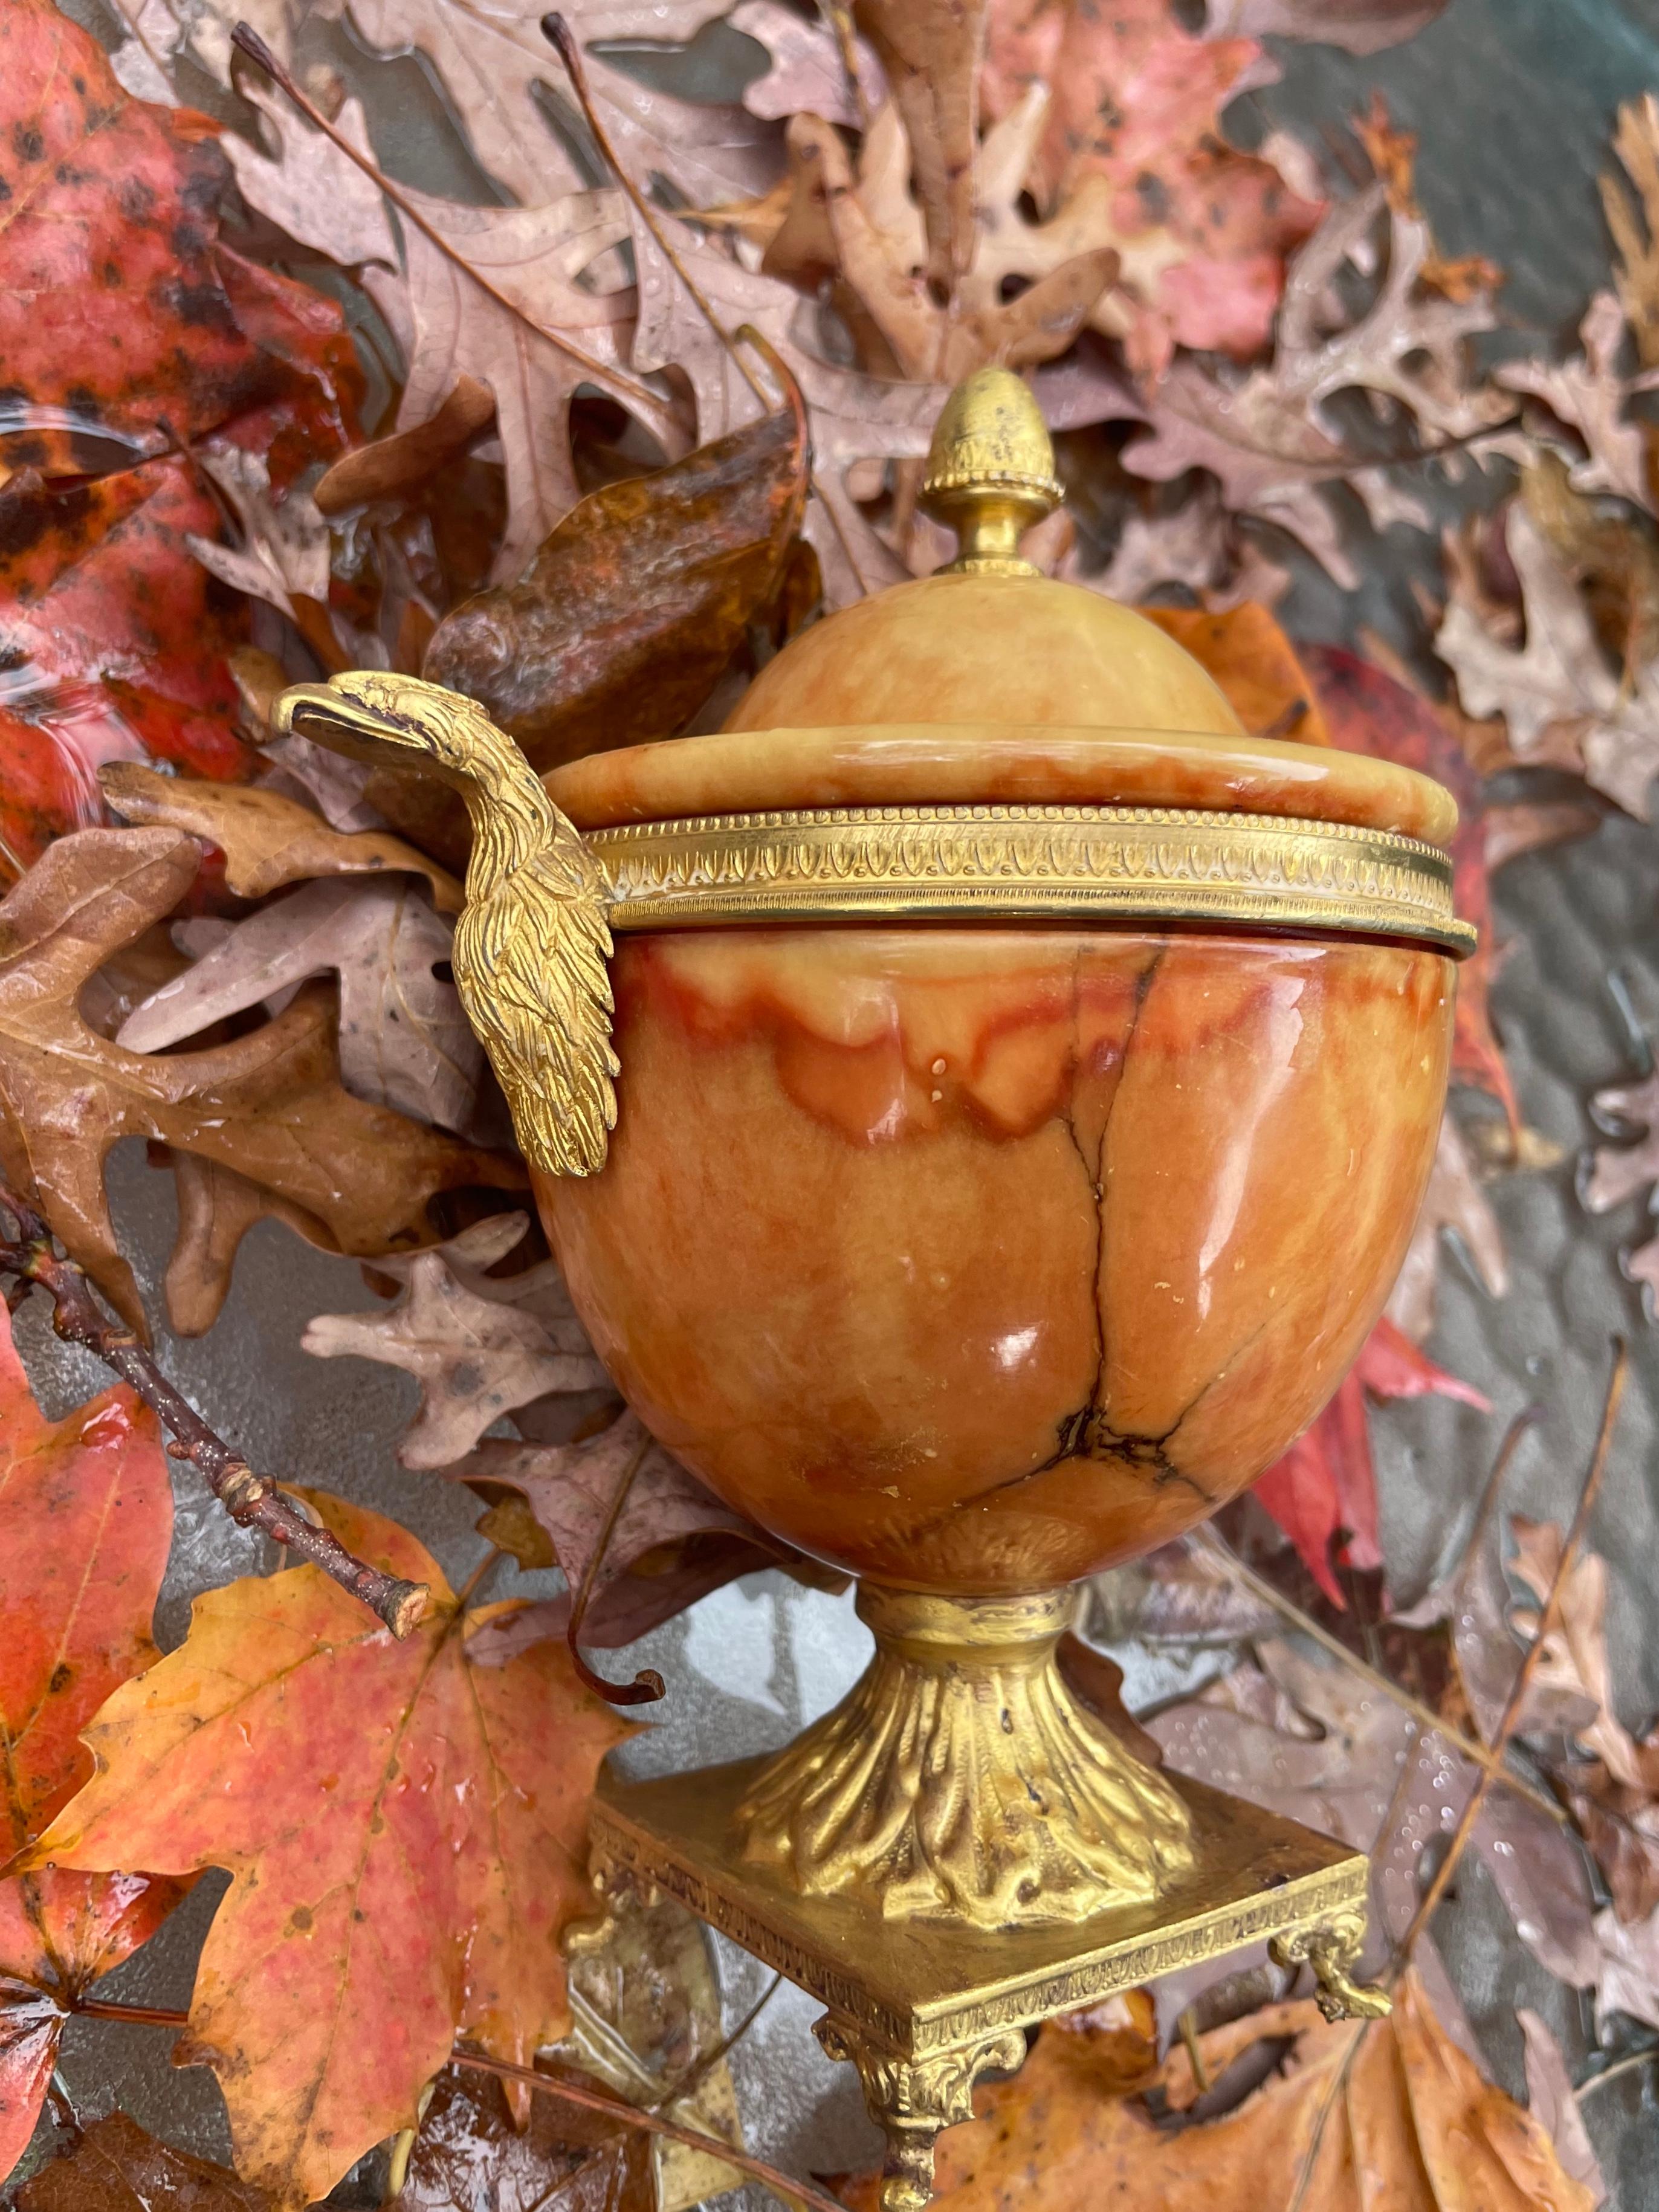 Napoleon III orange marble eagle urn.  Neoclassical style orange apricot marble urn with gold metal mounts at finial rim handles and base; gold painted antimony metal base with sculpted feet, neoclassical beaded trim at vase rim joining eagle